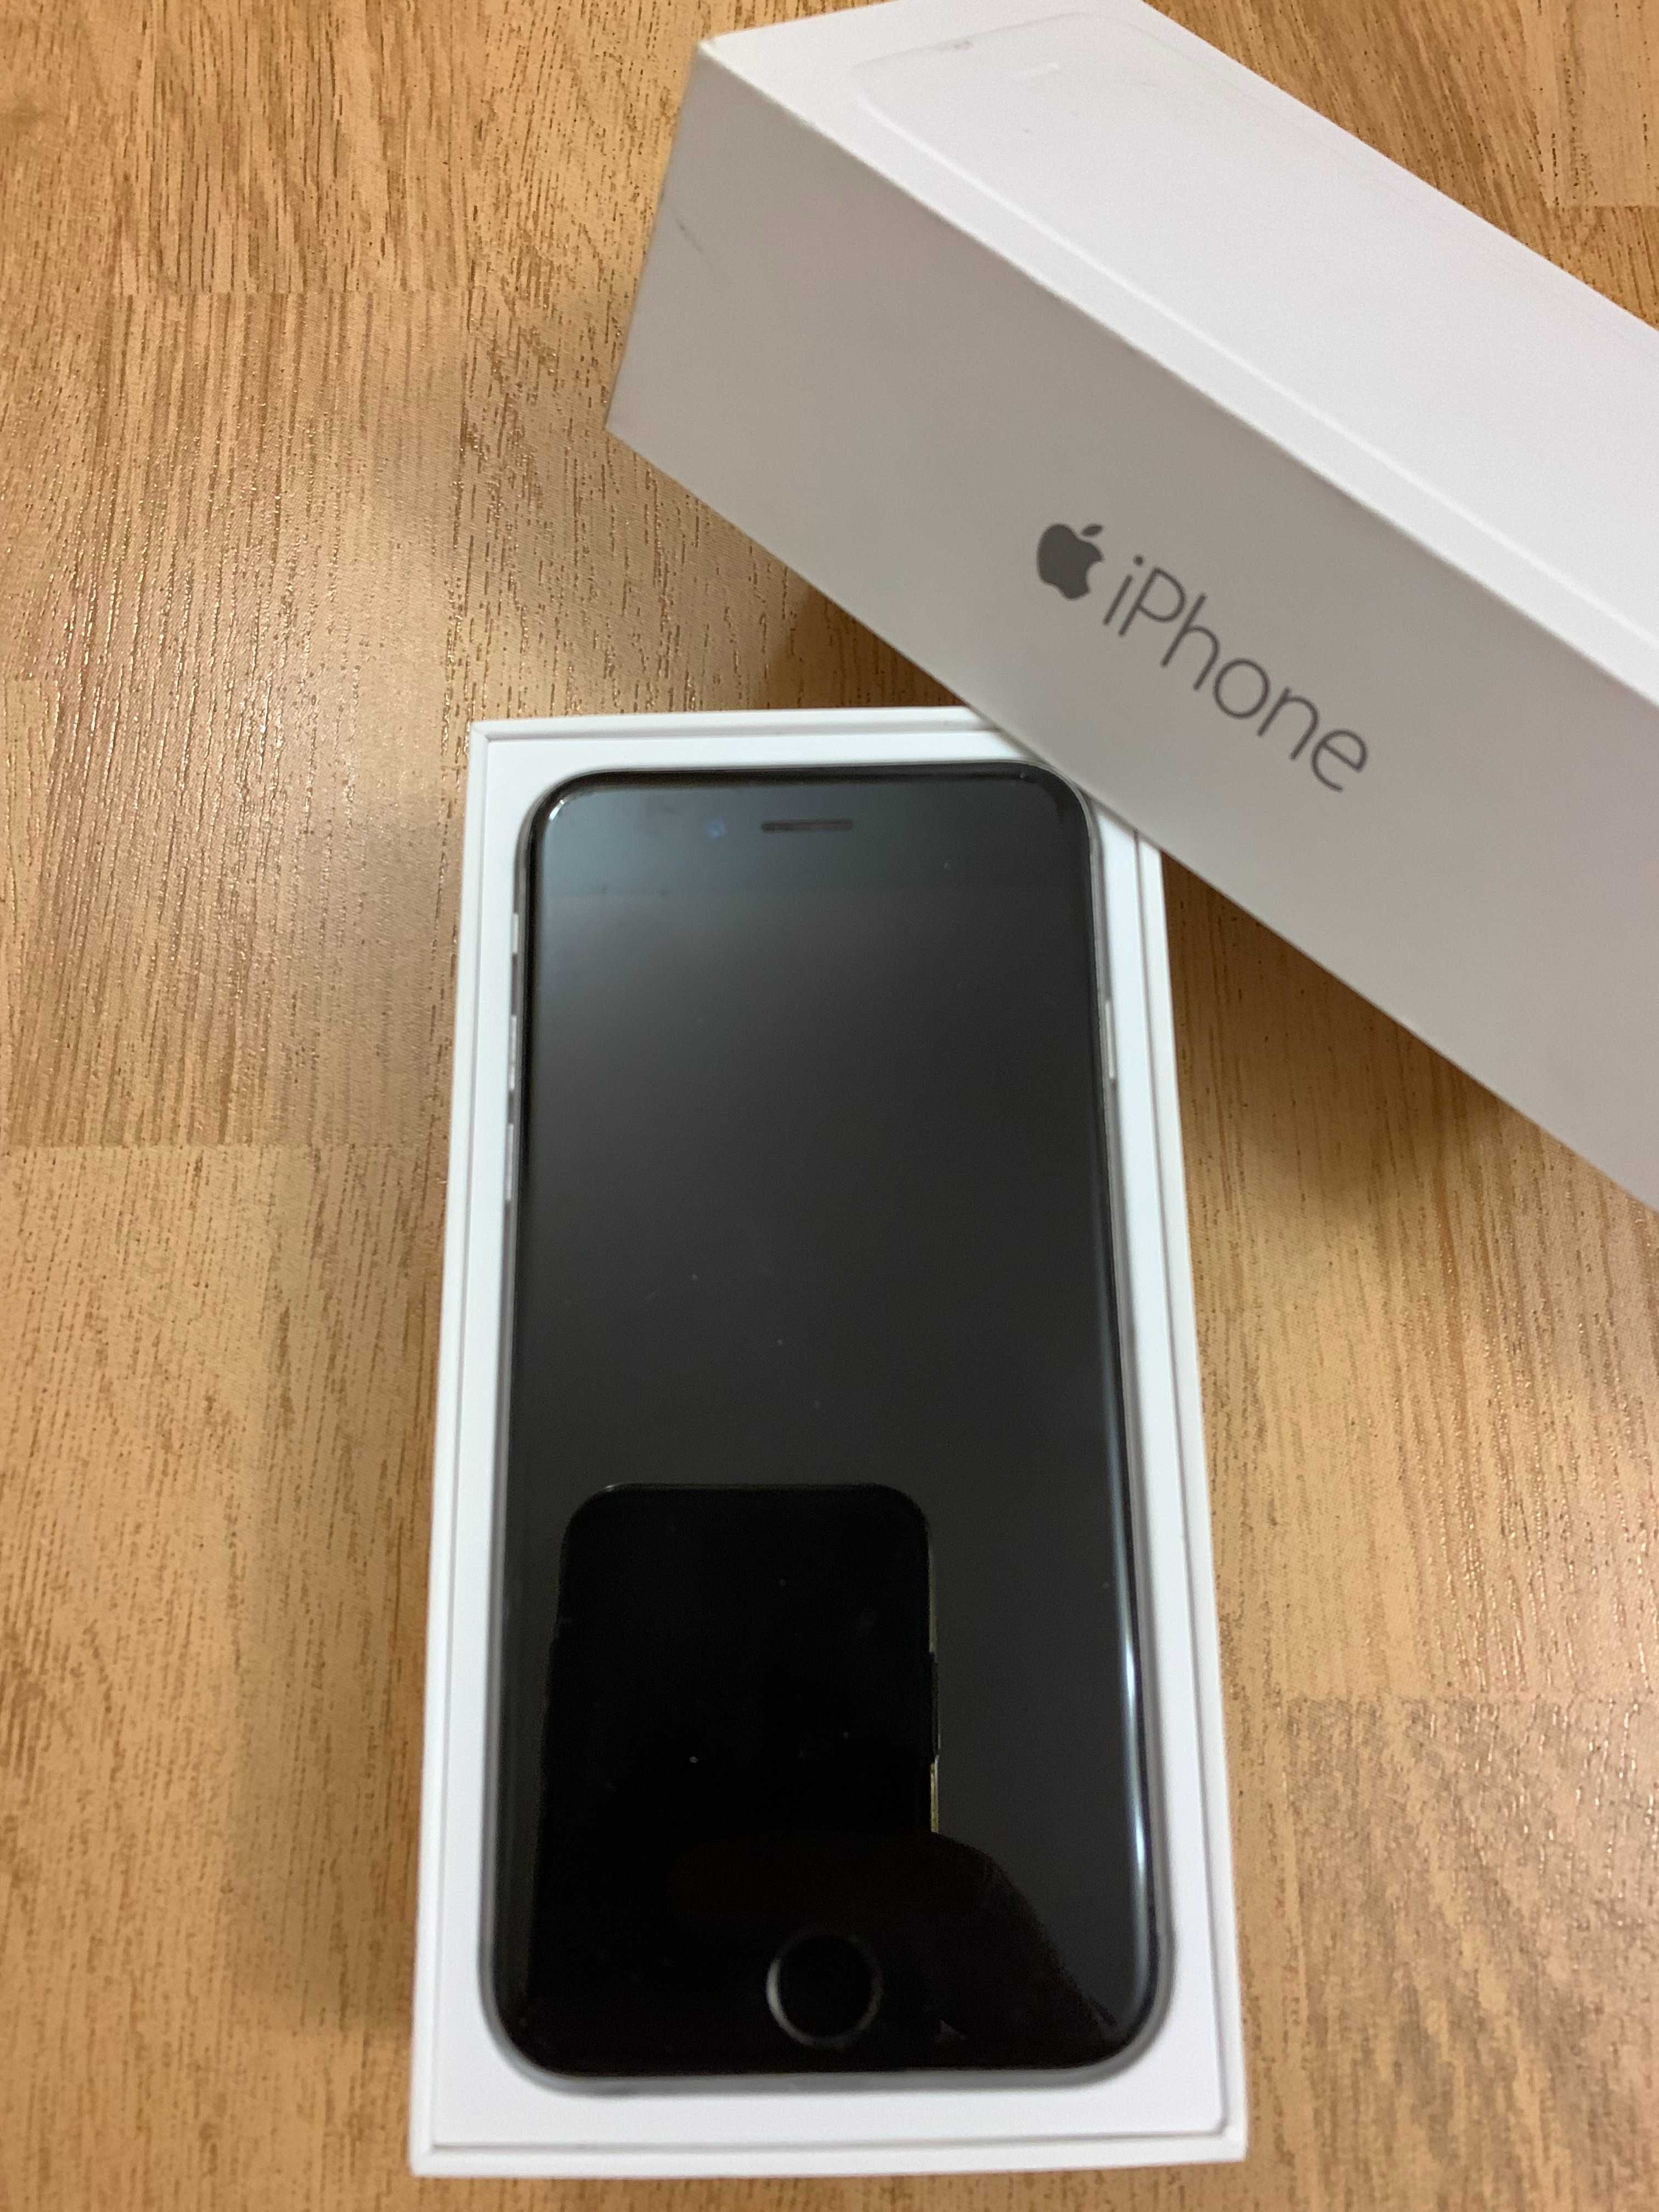 iPhone 6 Space Gray 16GB